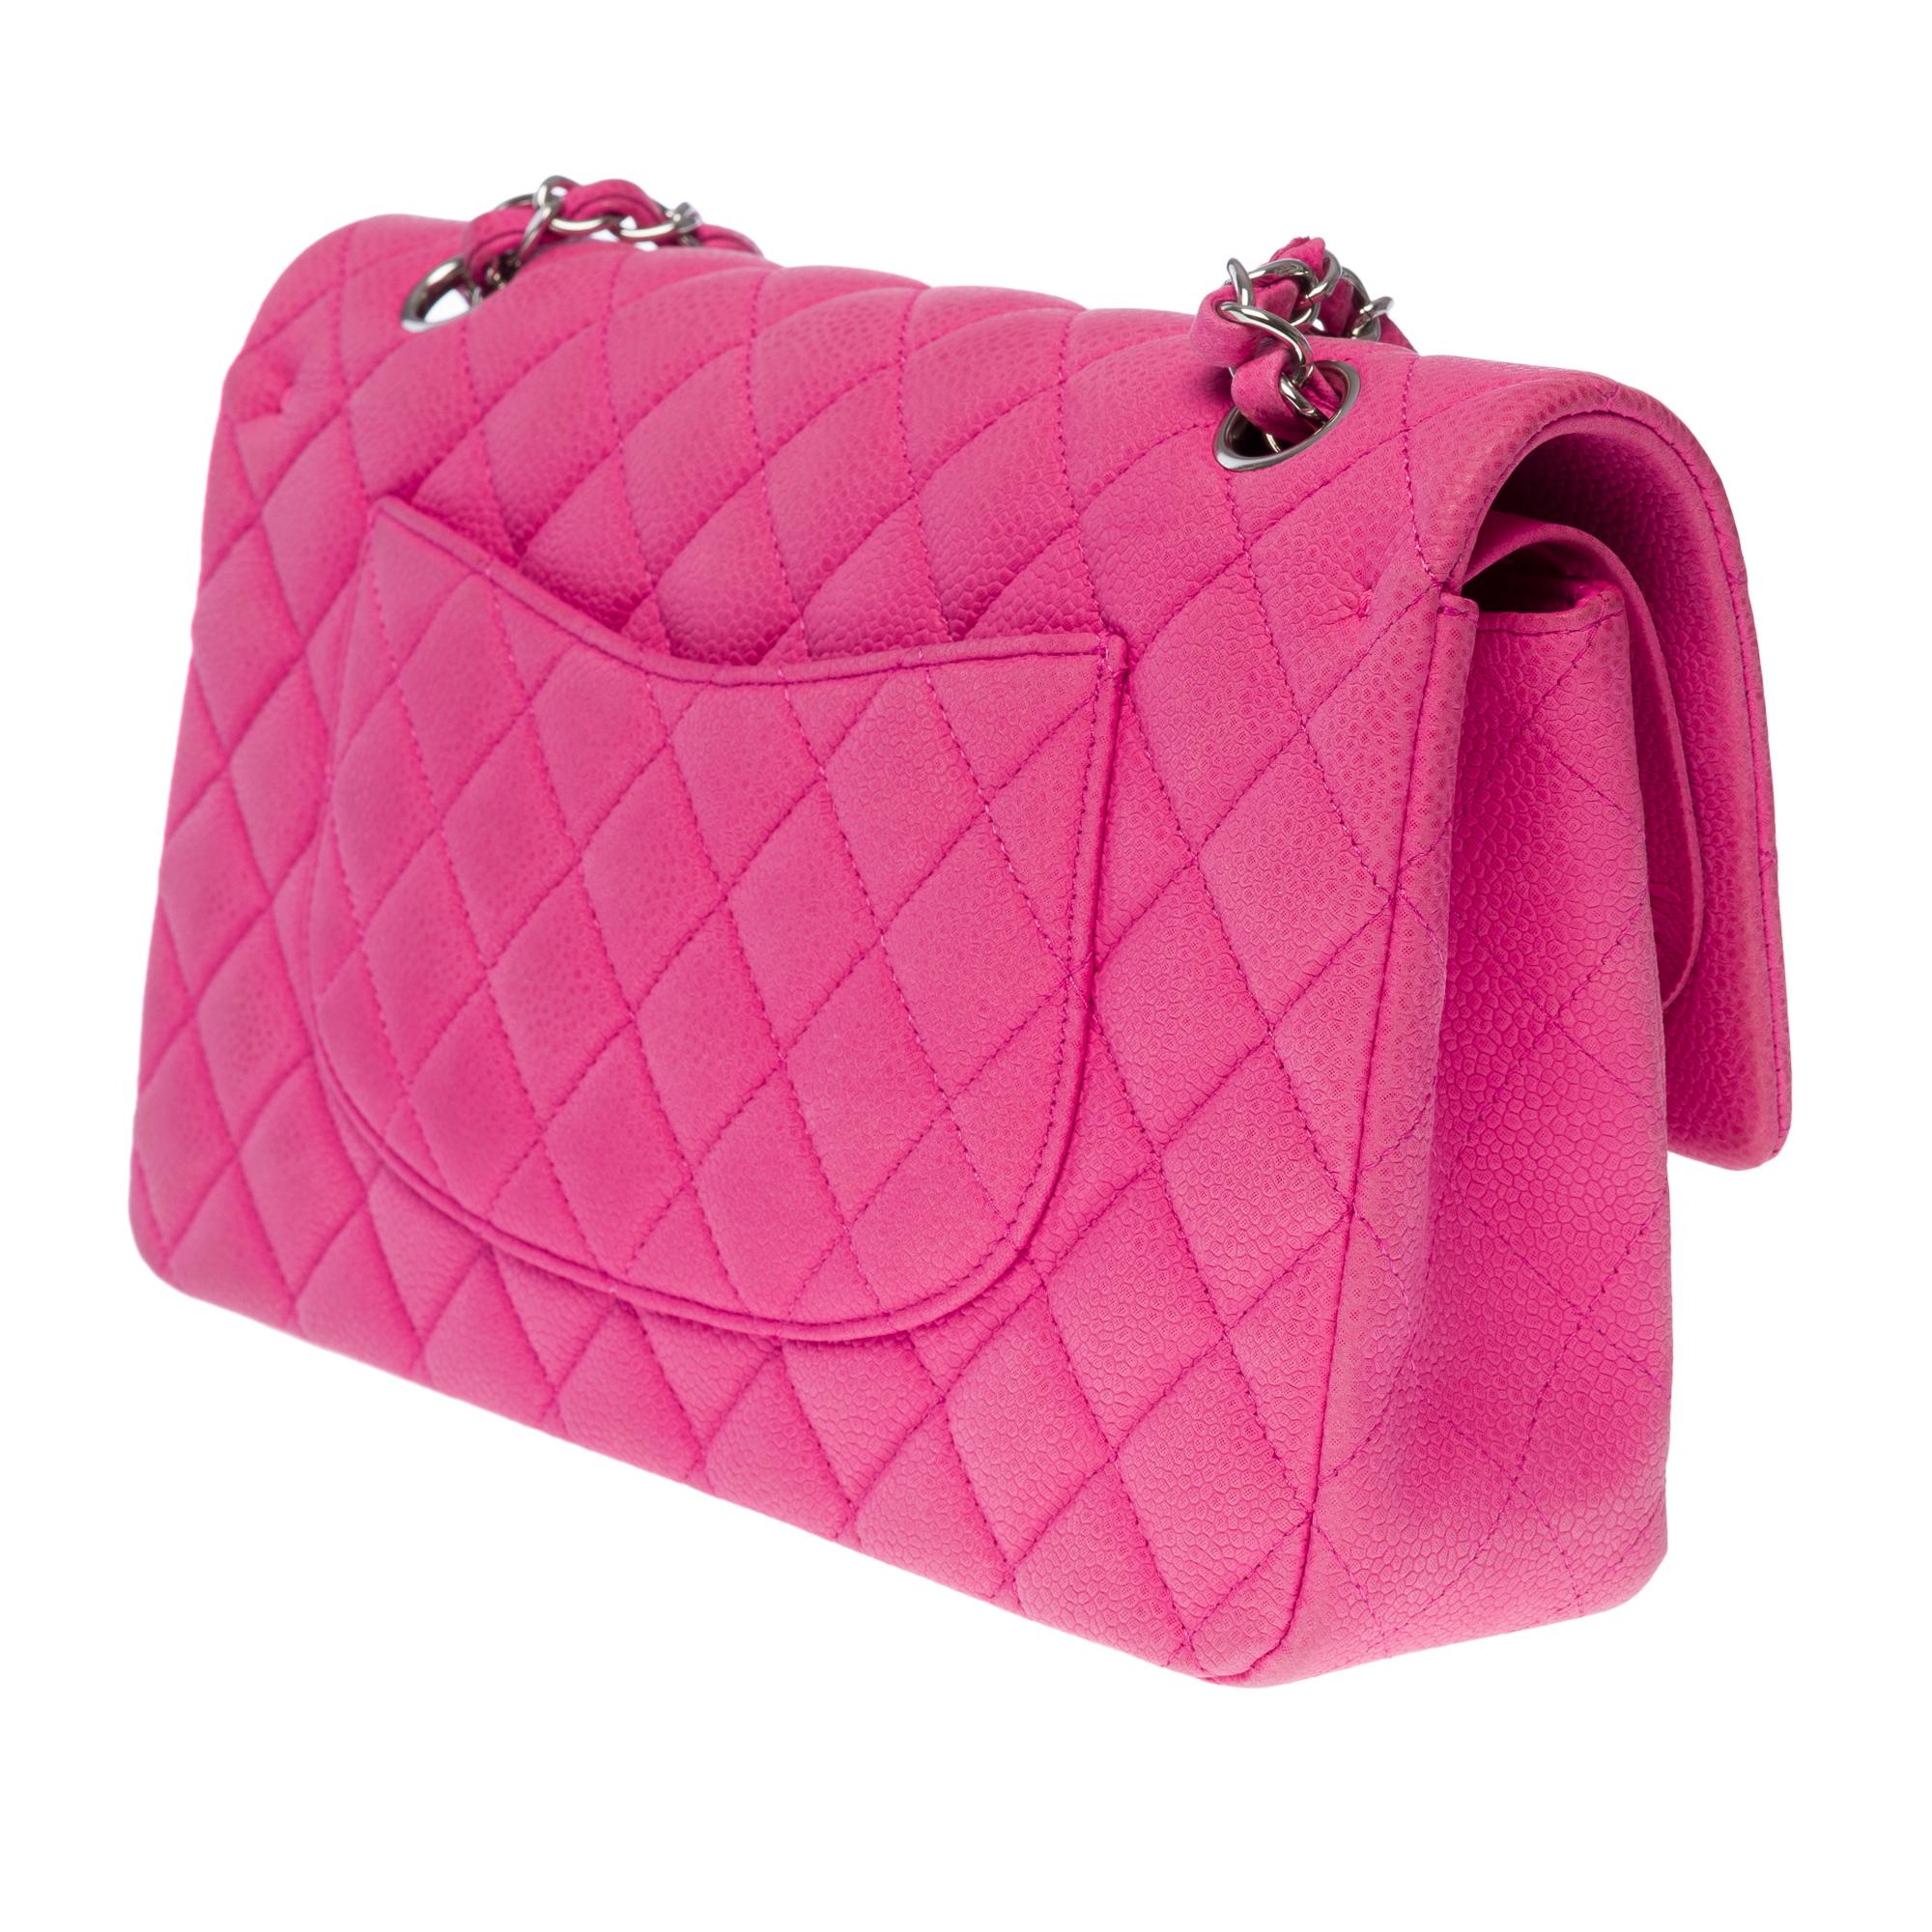 Chanel Timeless double flap shoulder bag in Pink caviar quilted leather, SHW For Sale 1